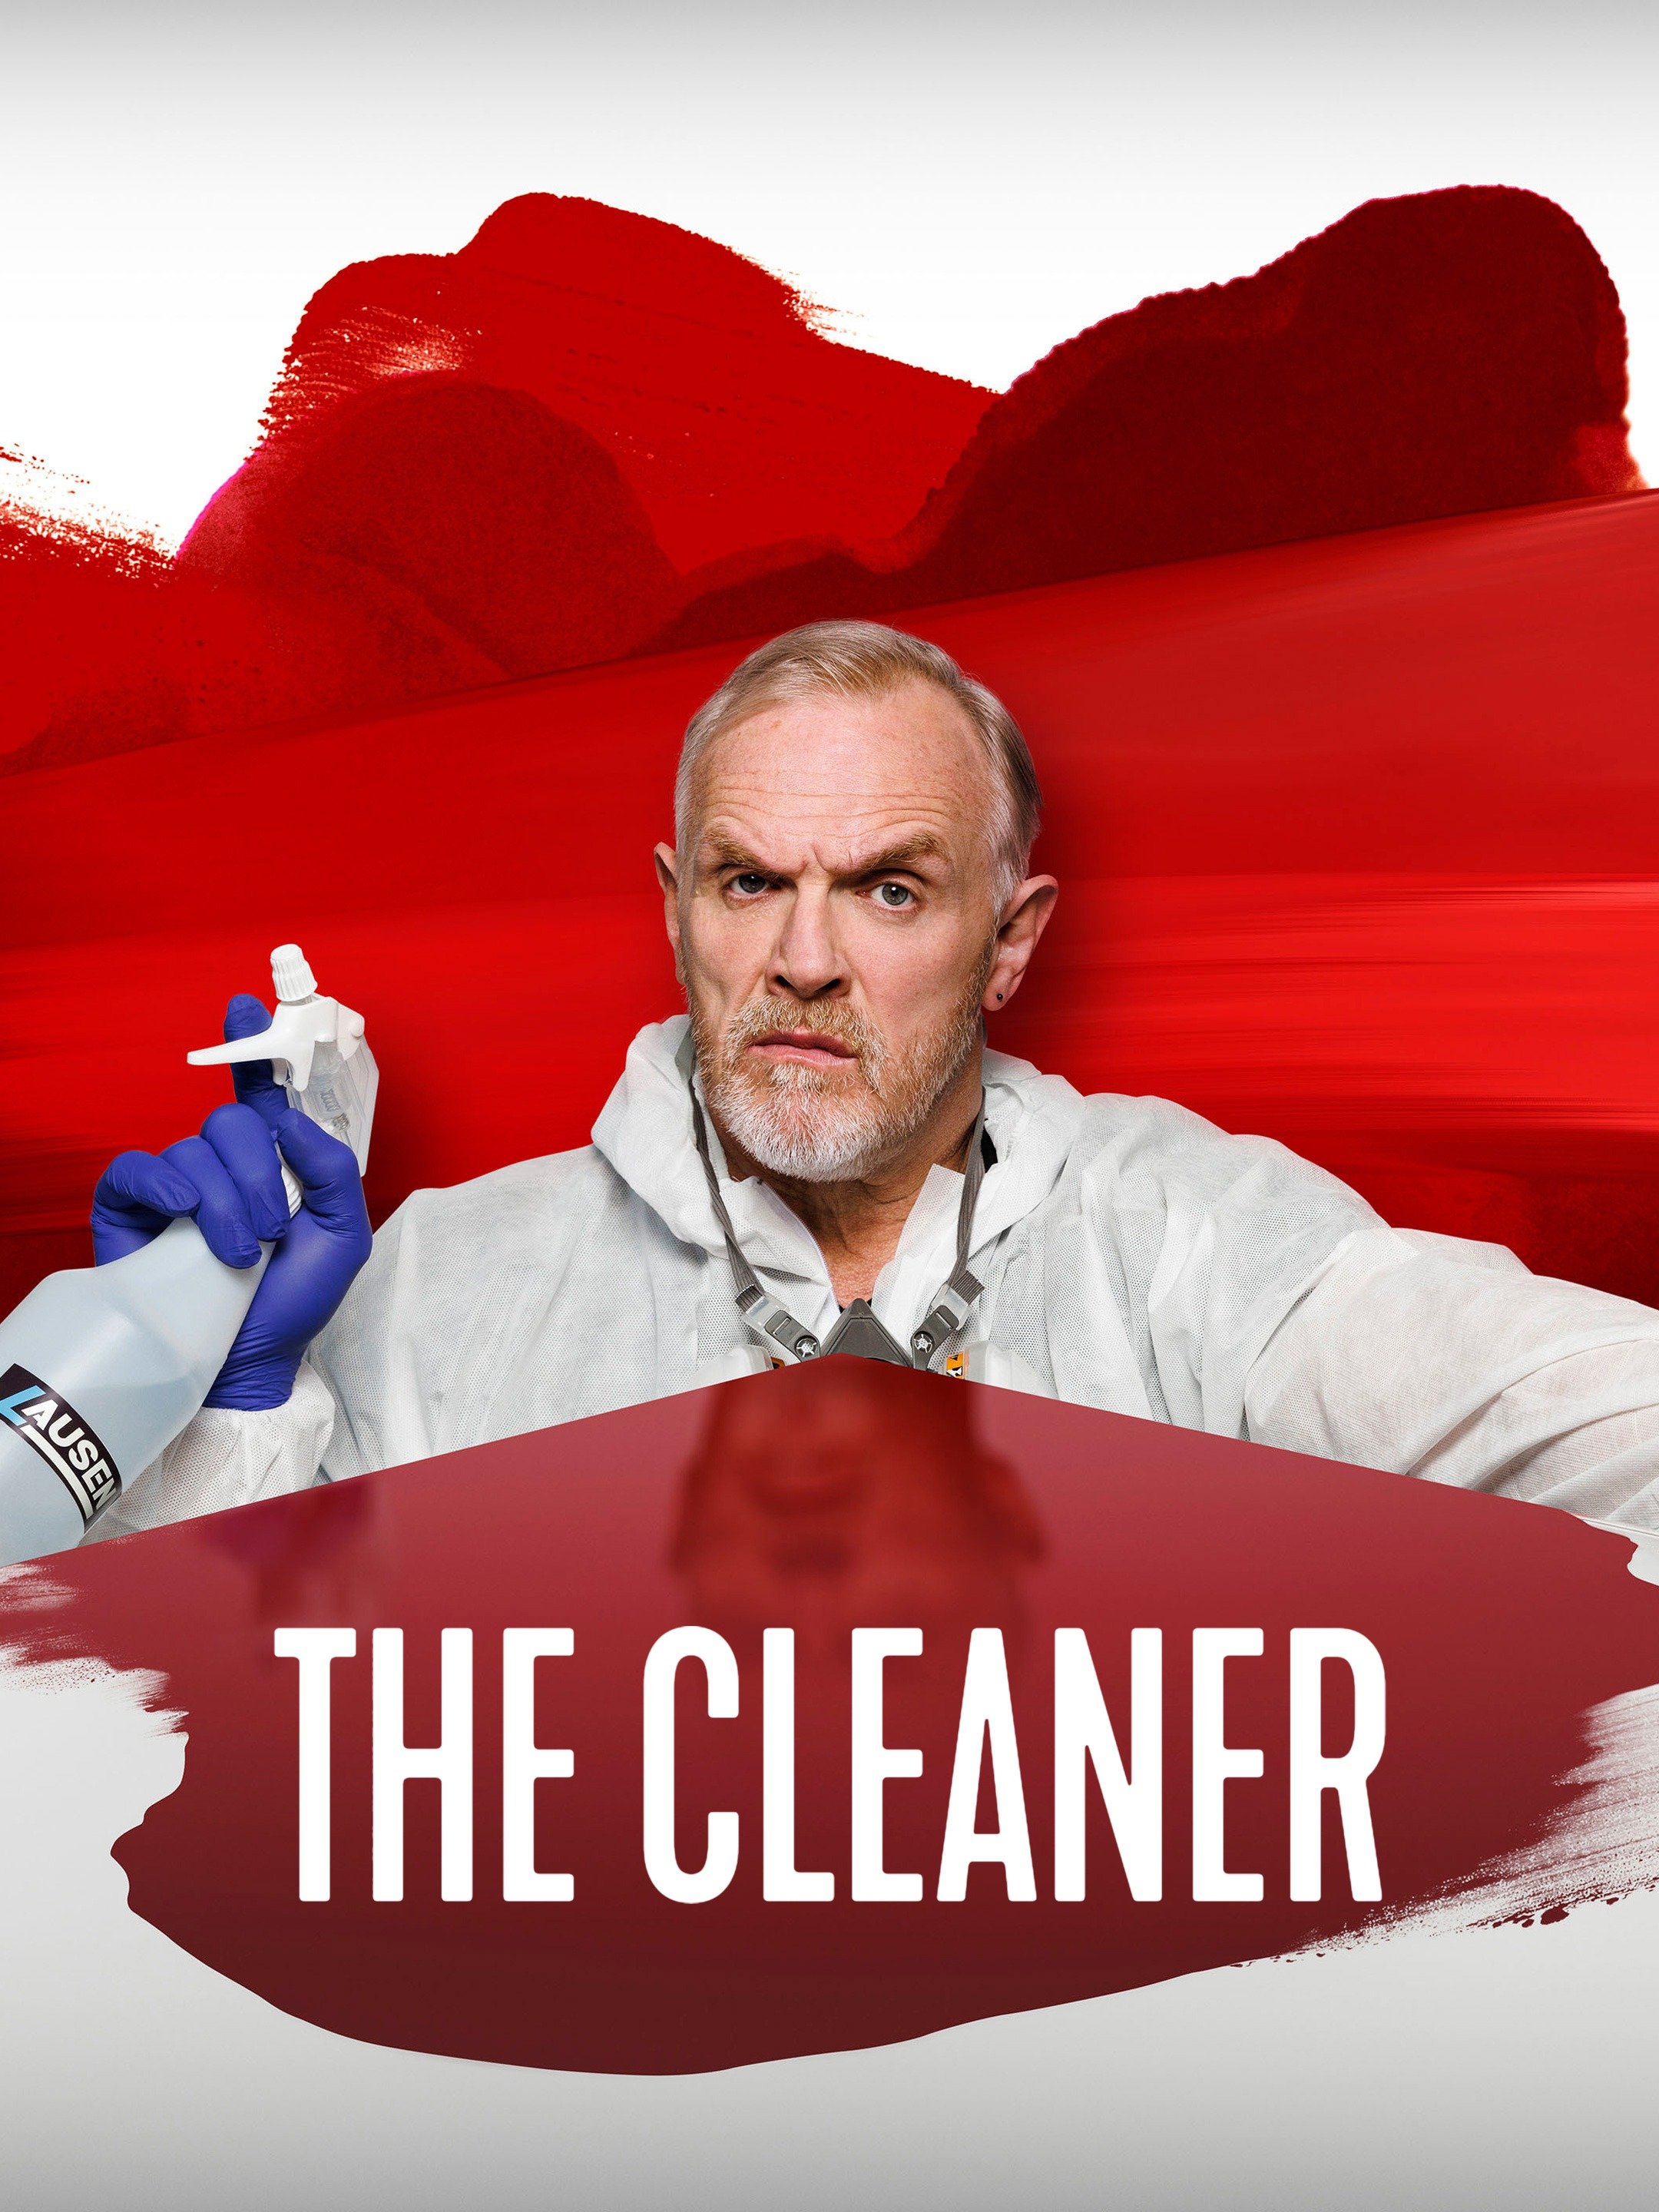 The Cleaner - Rotten Tomatoes